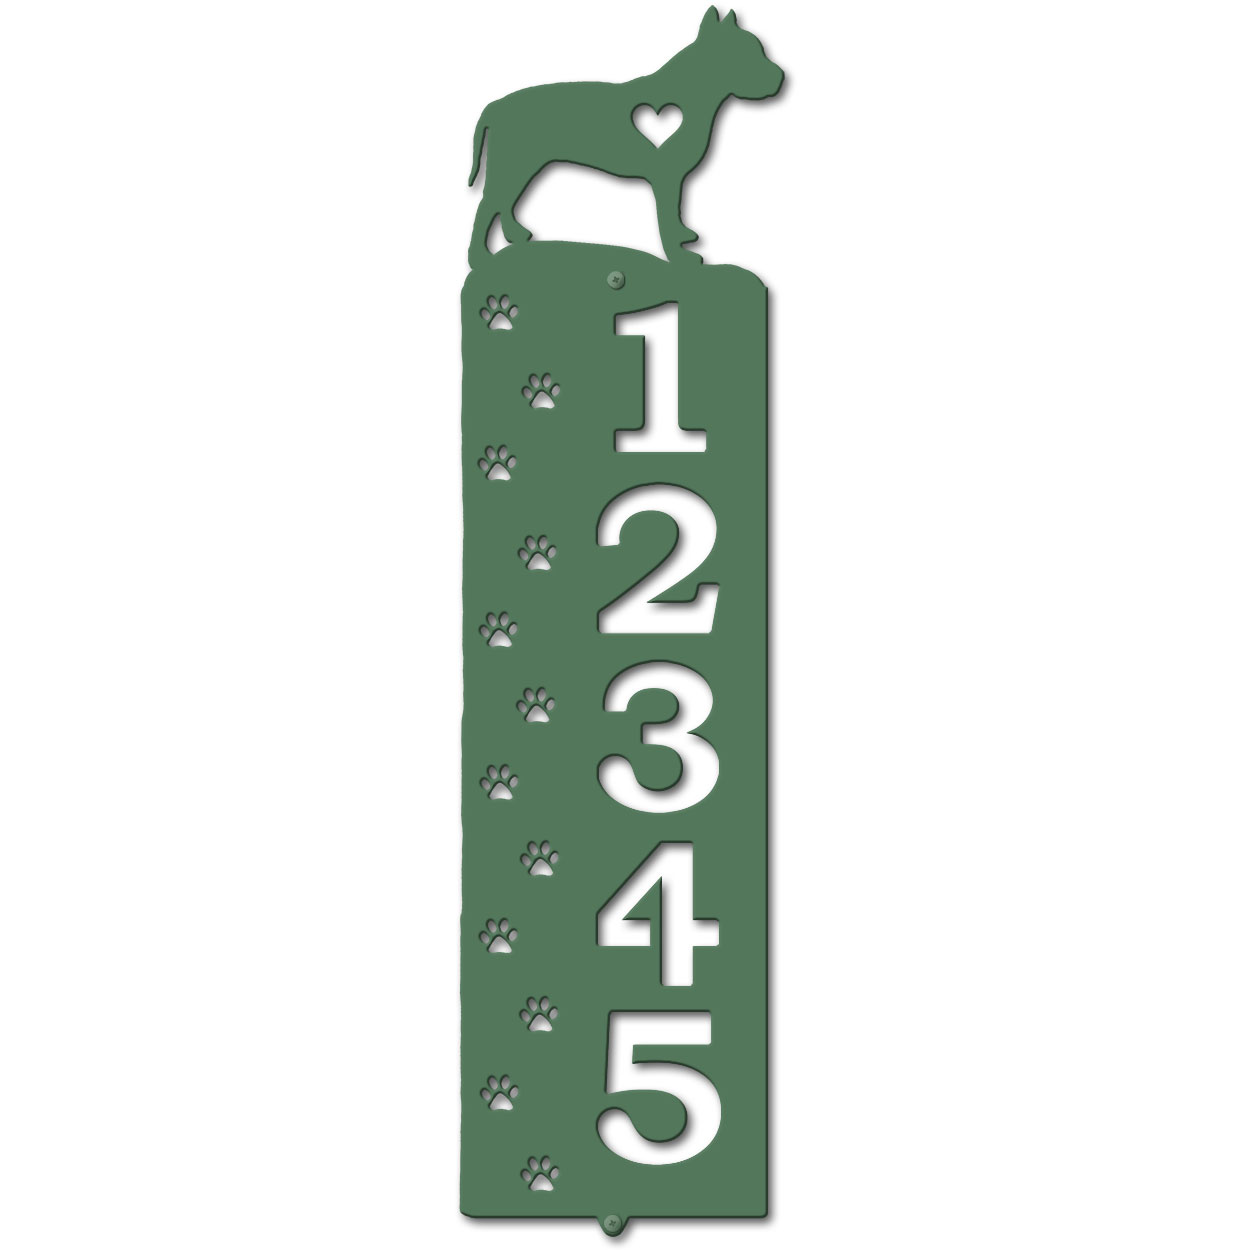 636275 - Pitbull Cut Outs Five Digit Address Number Plaque